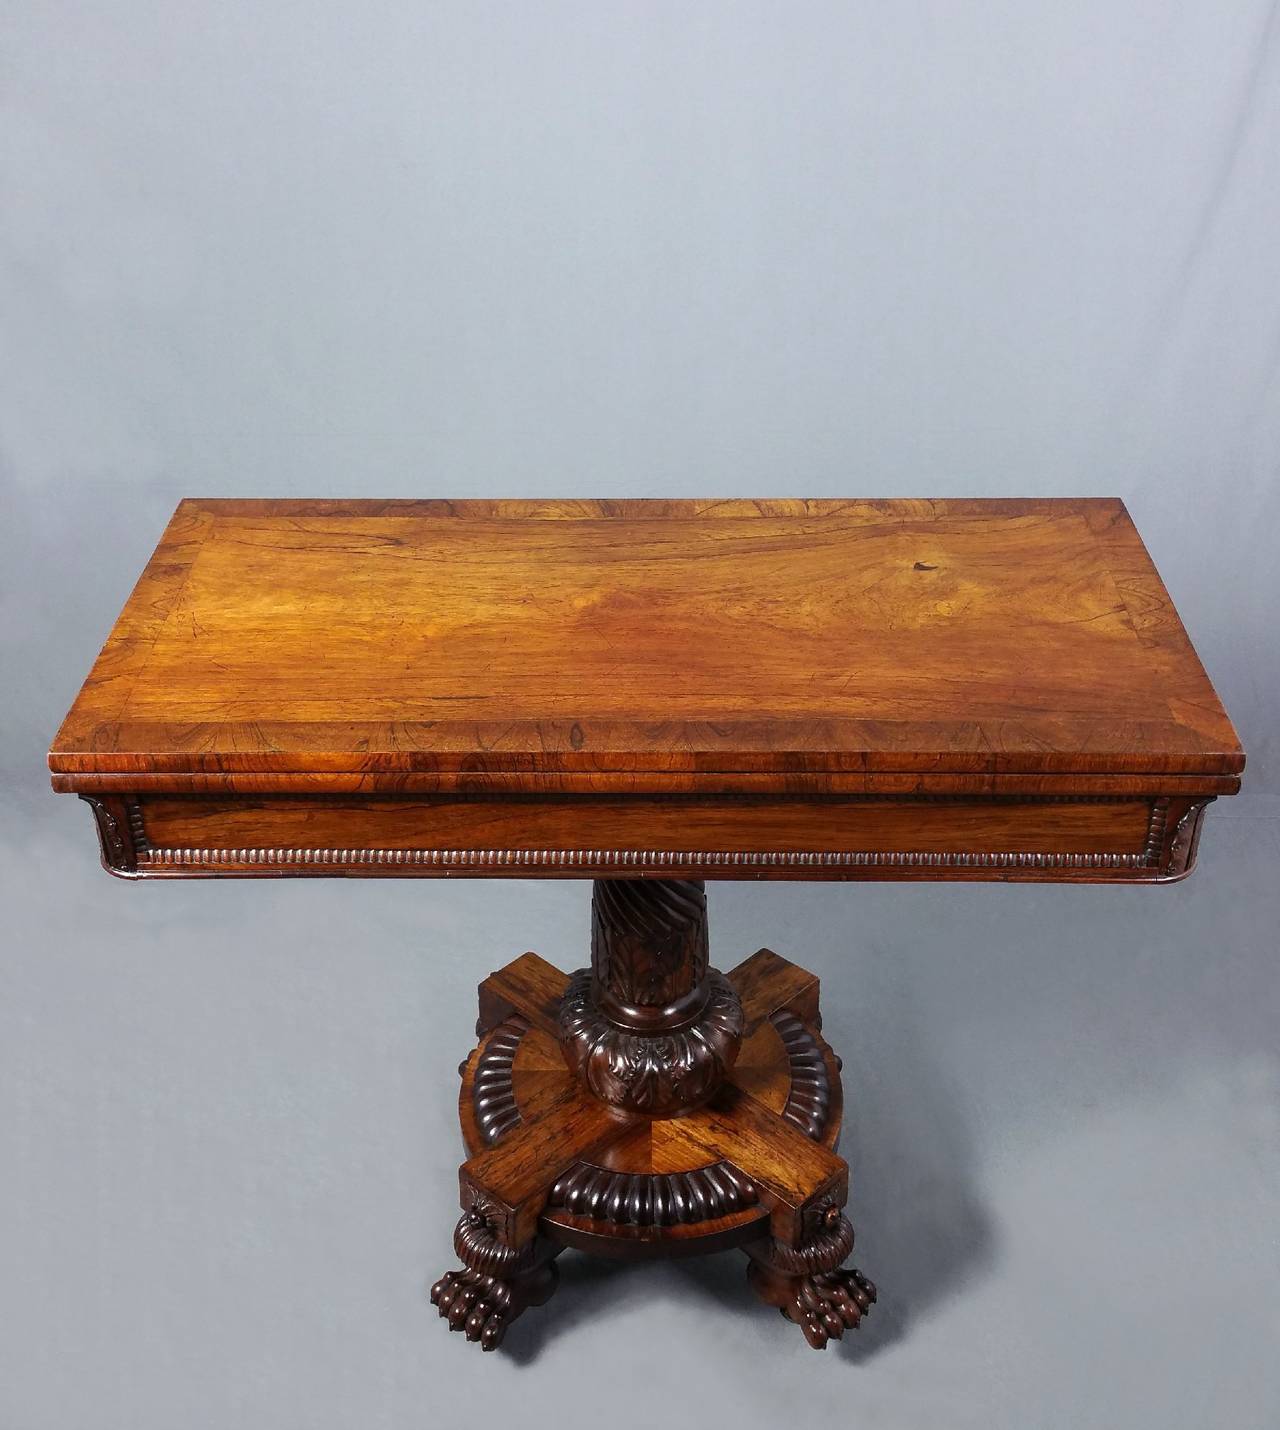 This superb and rare Regency rosewood card table features a beautifully patinated top with a wide cross banded border and rounded corners on the apron that are finished with a carved leaf design. The table is supported on an ornately cut pedestal